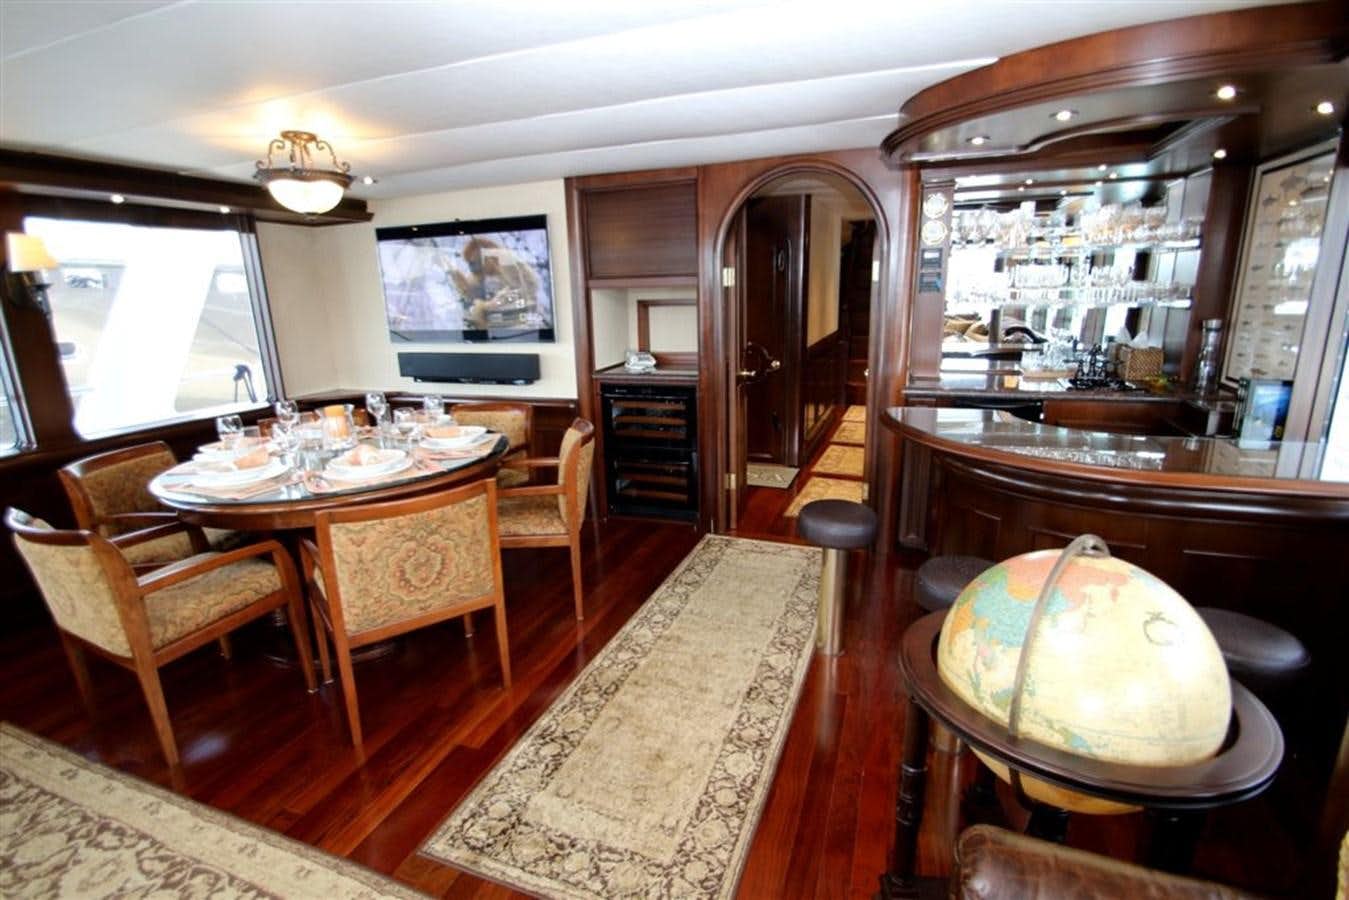 ALHAMBRA Yacht for Sale in Imperia, 116' 1 (35.4m) 1970 Feadship